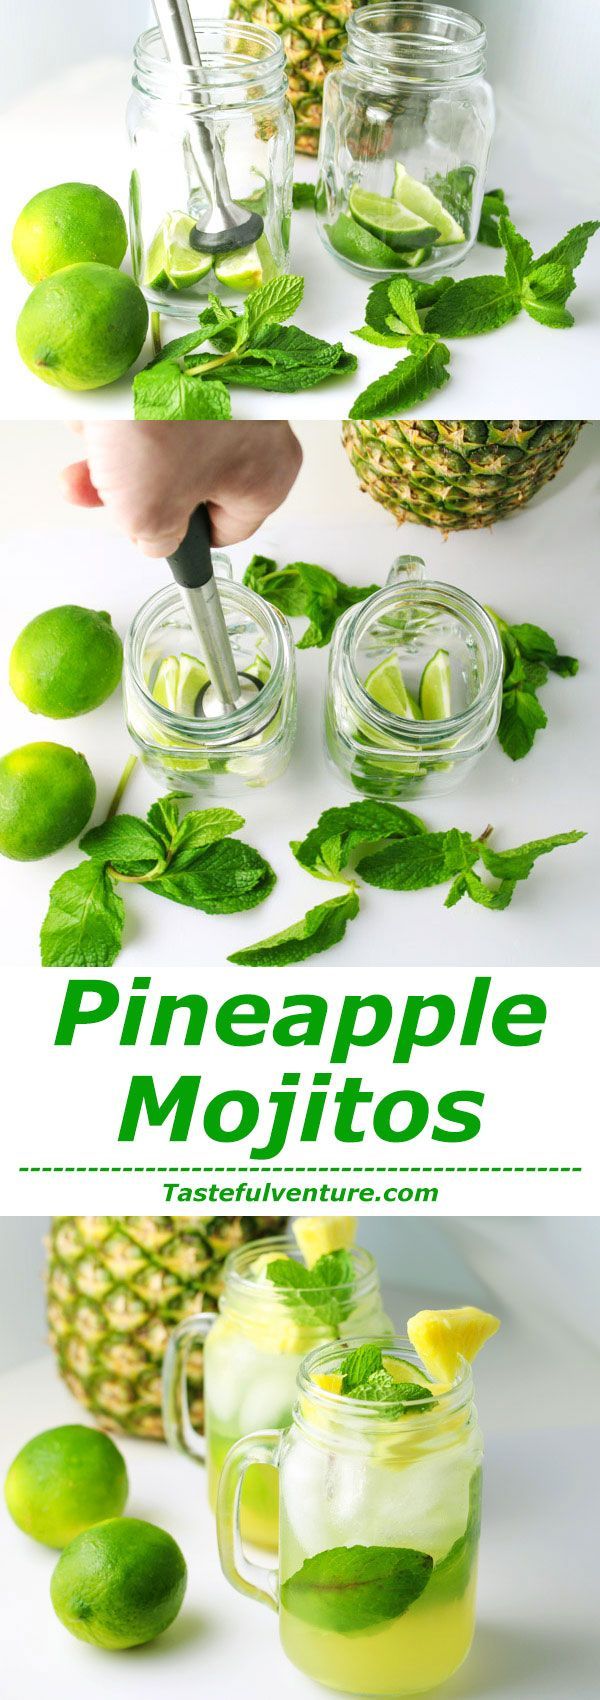 These Pineapple Mojitos are so light and refreshing, it’s the perfect Cocktail! | Tastefulventure.com